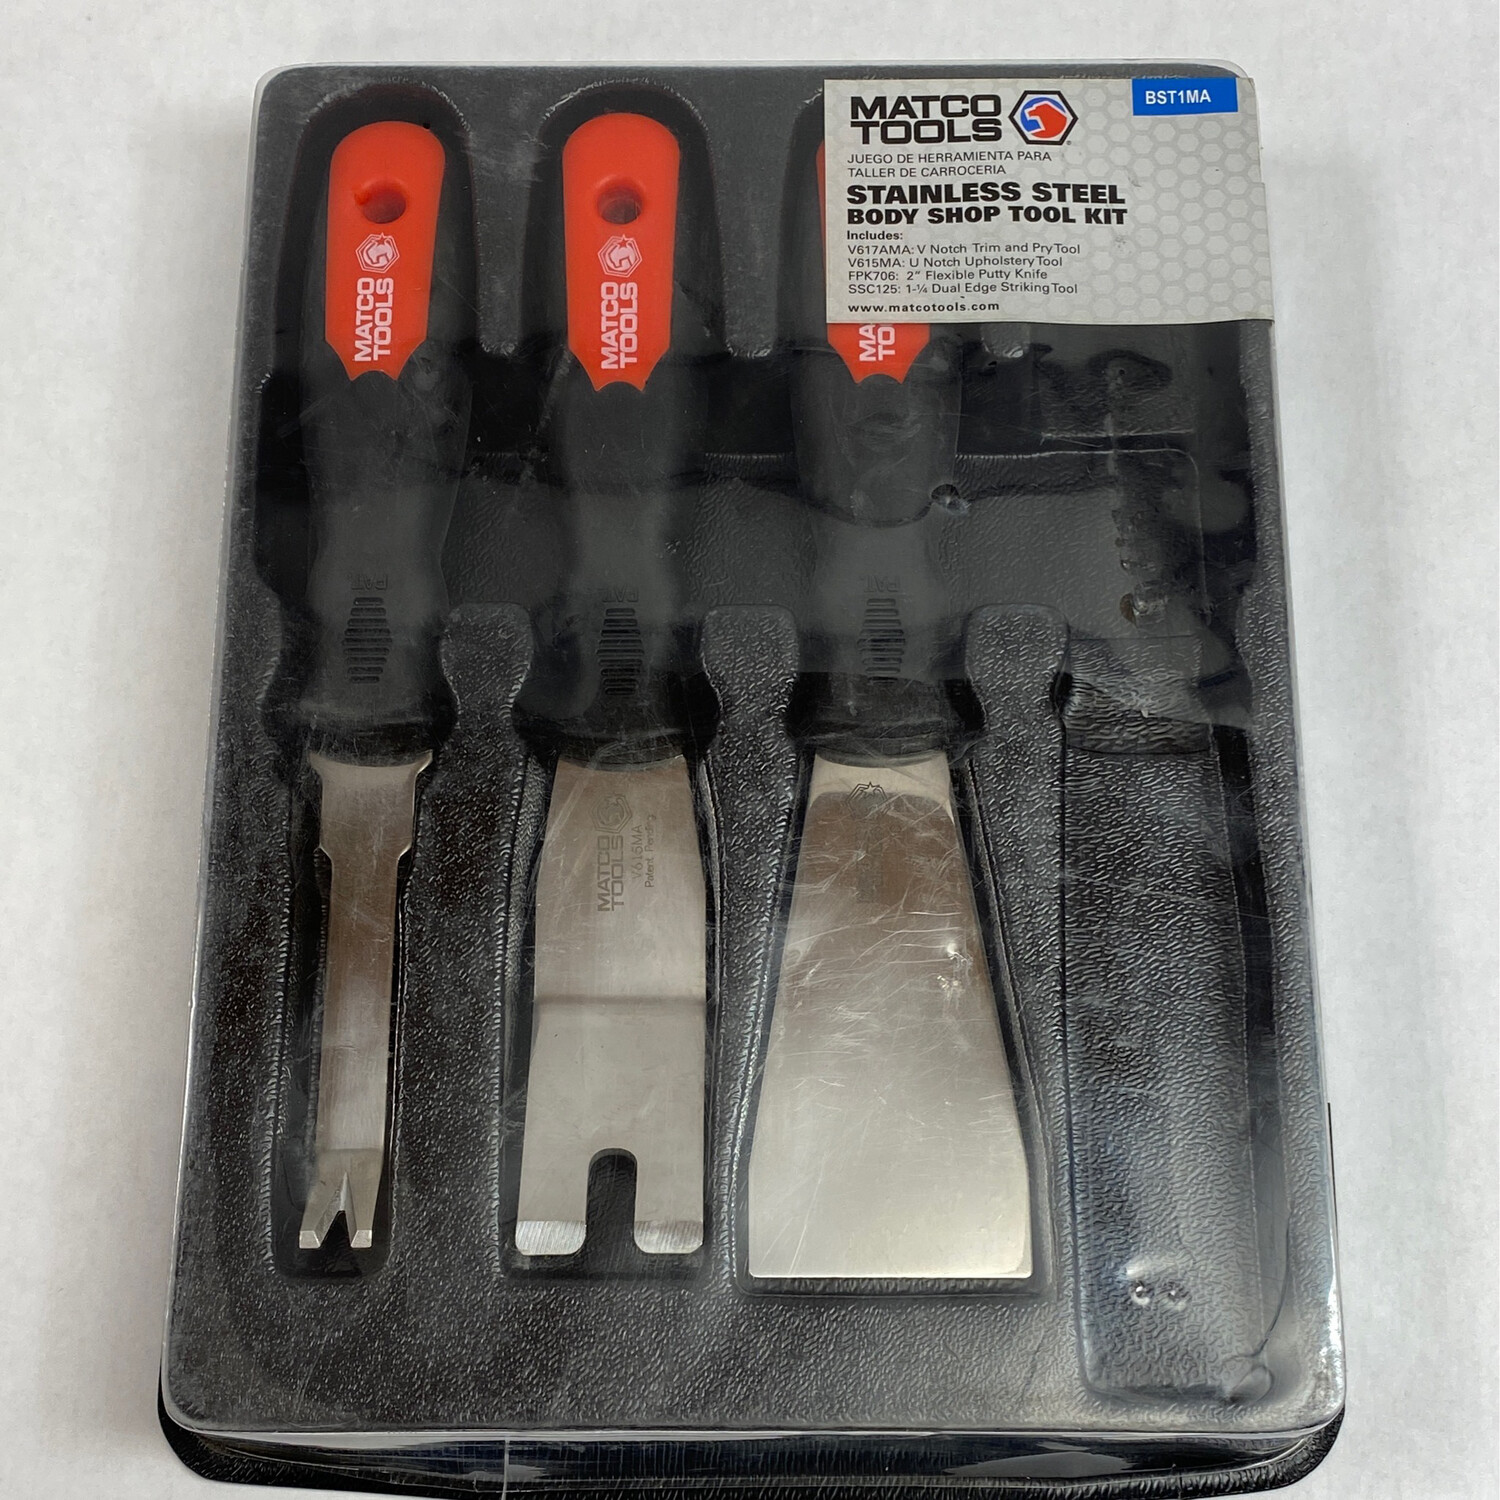 Upholstery and Trim Tool Set, 5 Piece